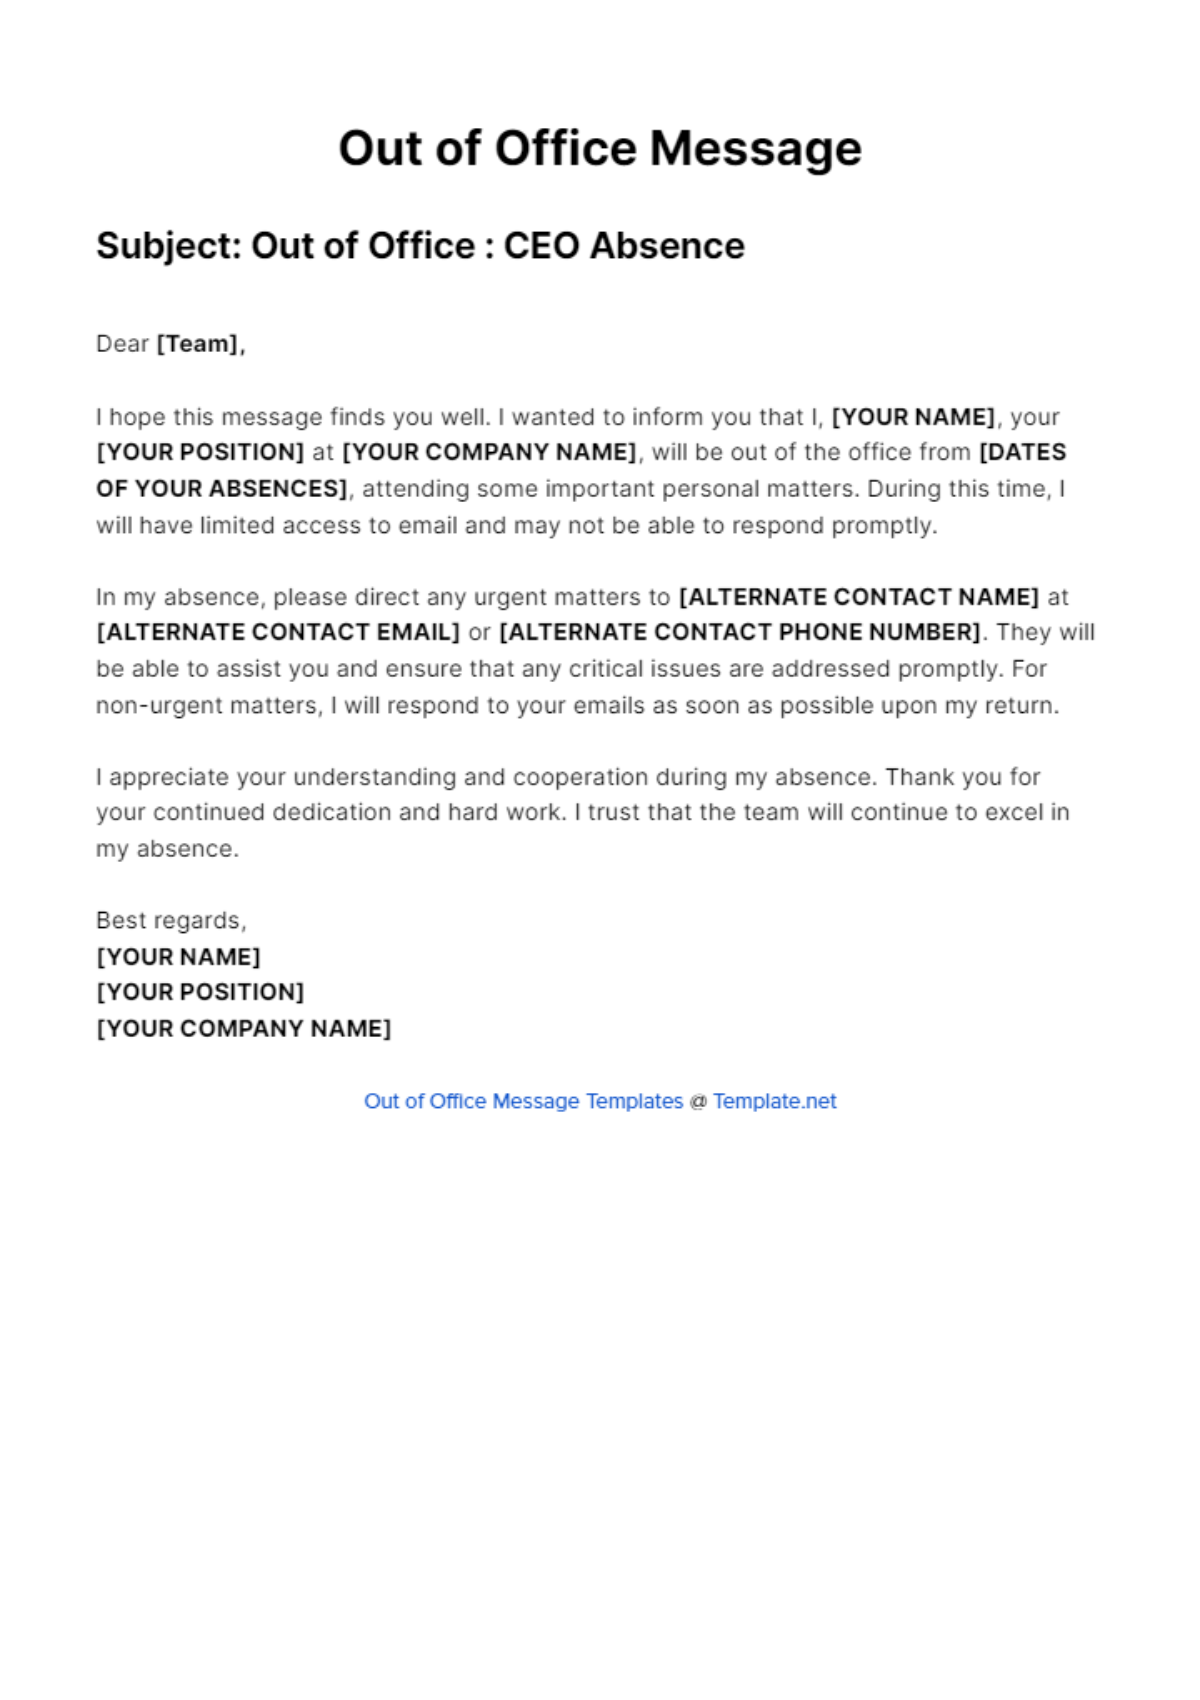 Free Ceo Out Of Office Message Template